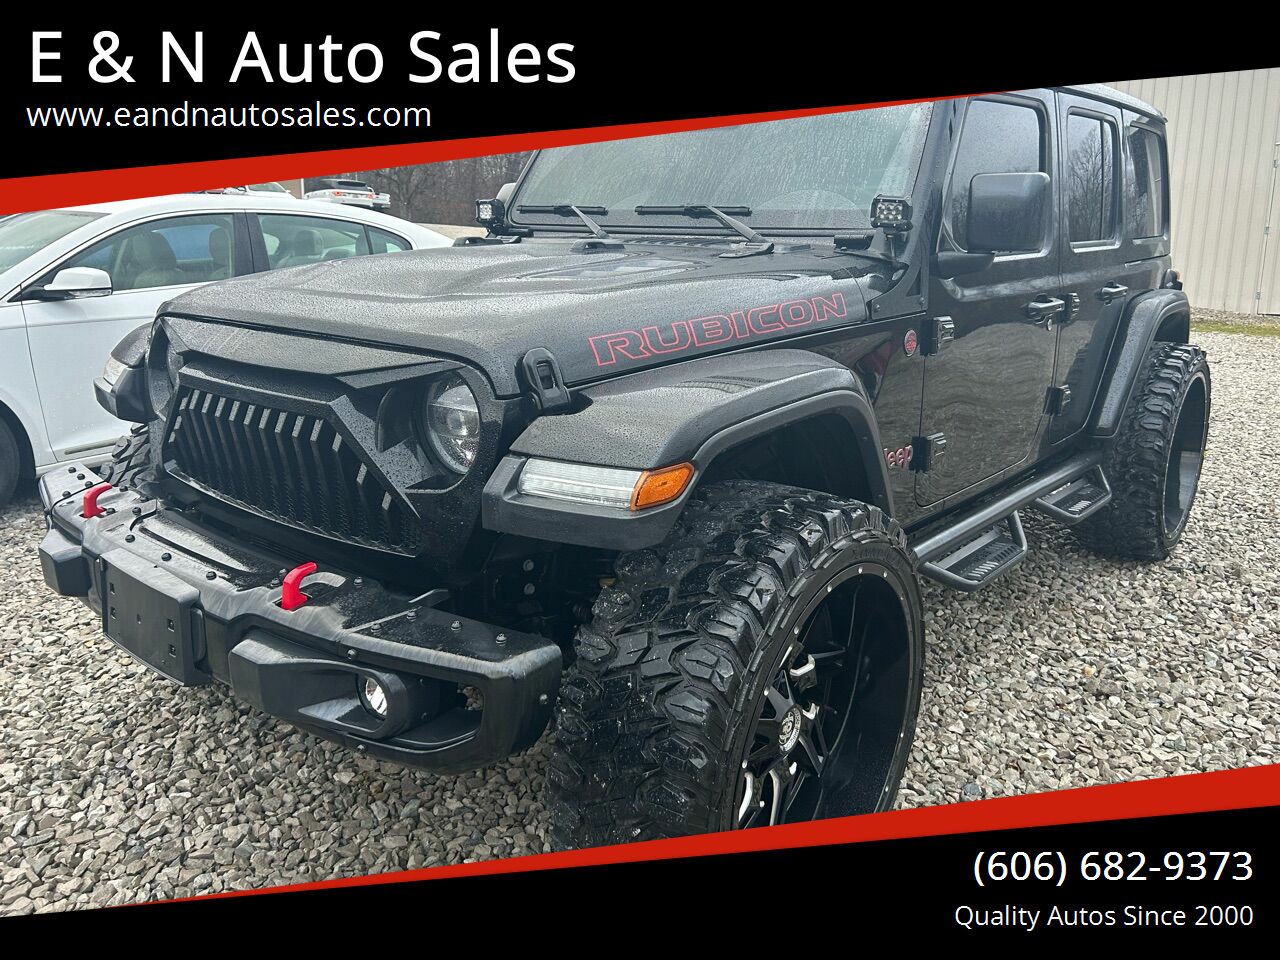 Jeep Wrangler Unlimited For Sale In Kentucky ®